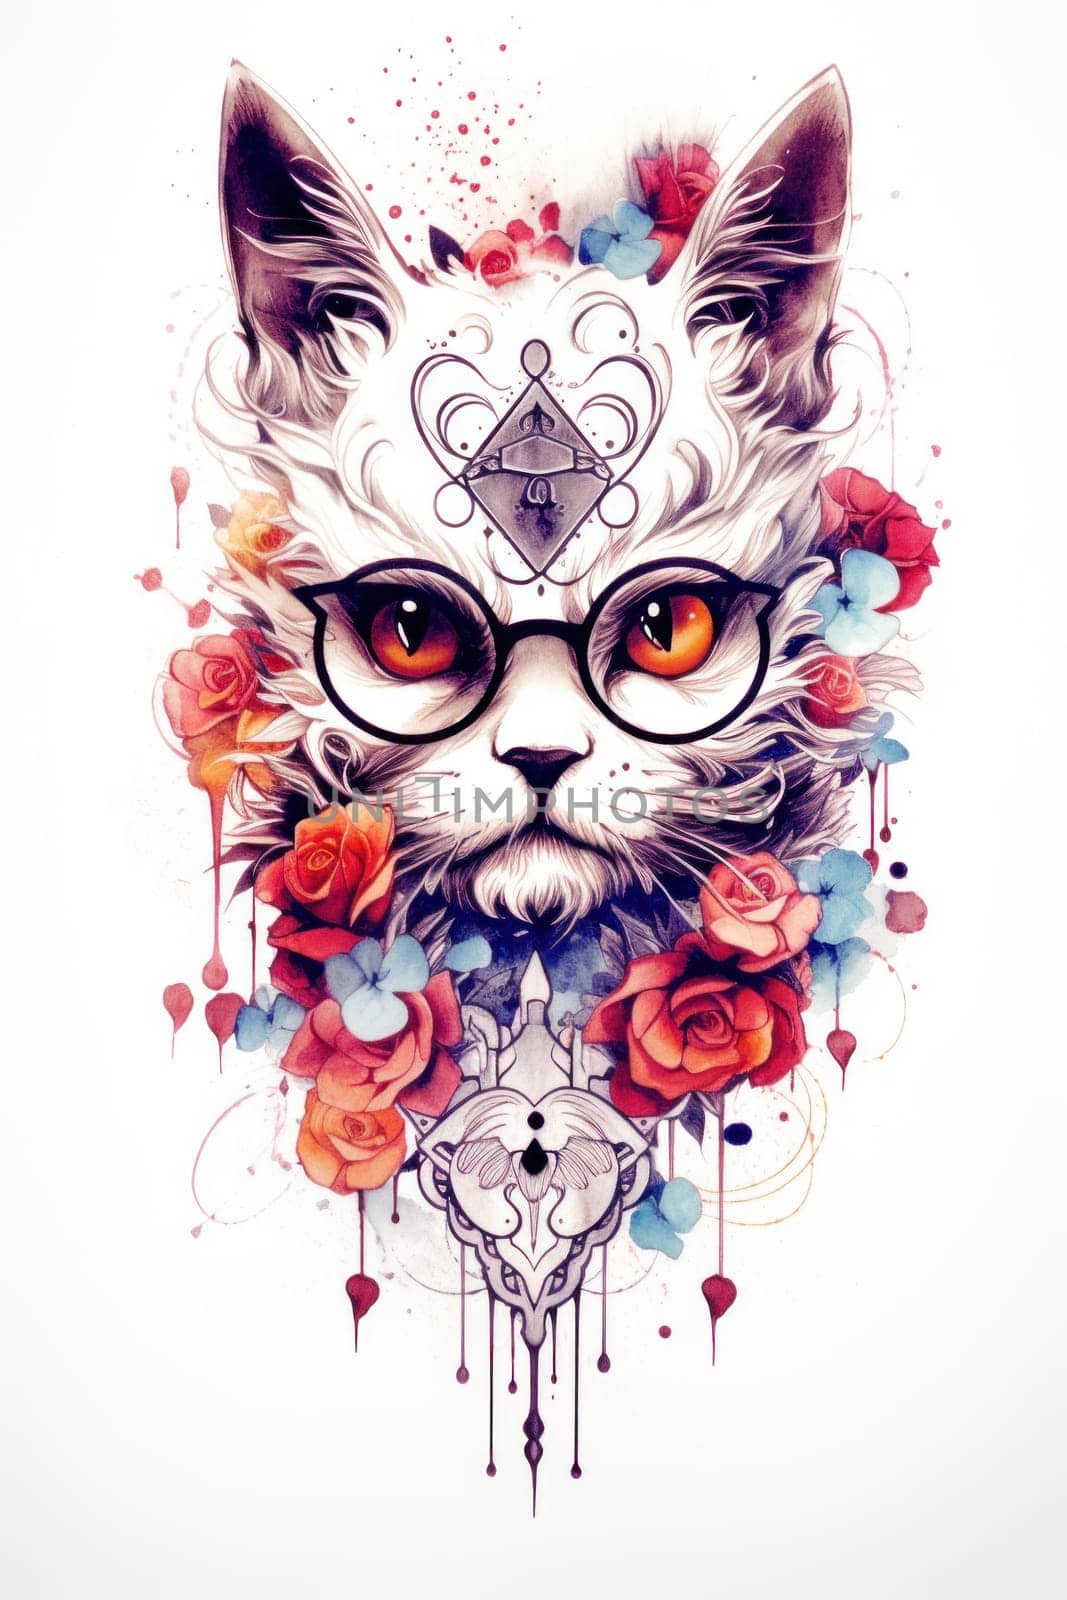 A drawing of a cat with glasses and flowers